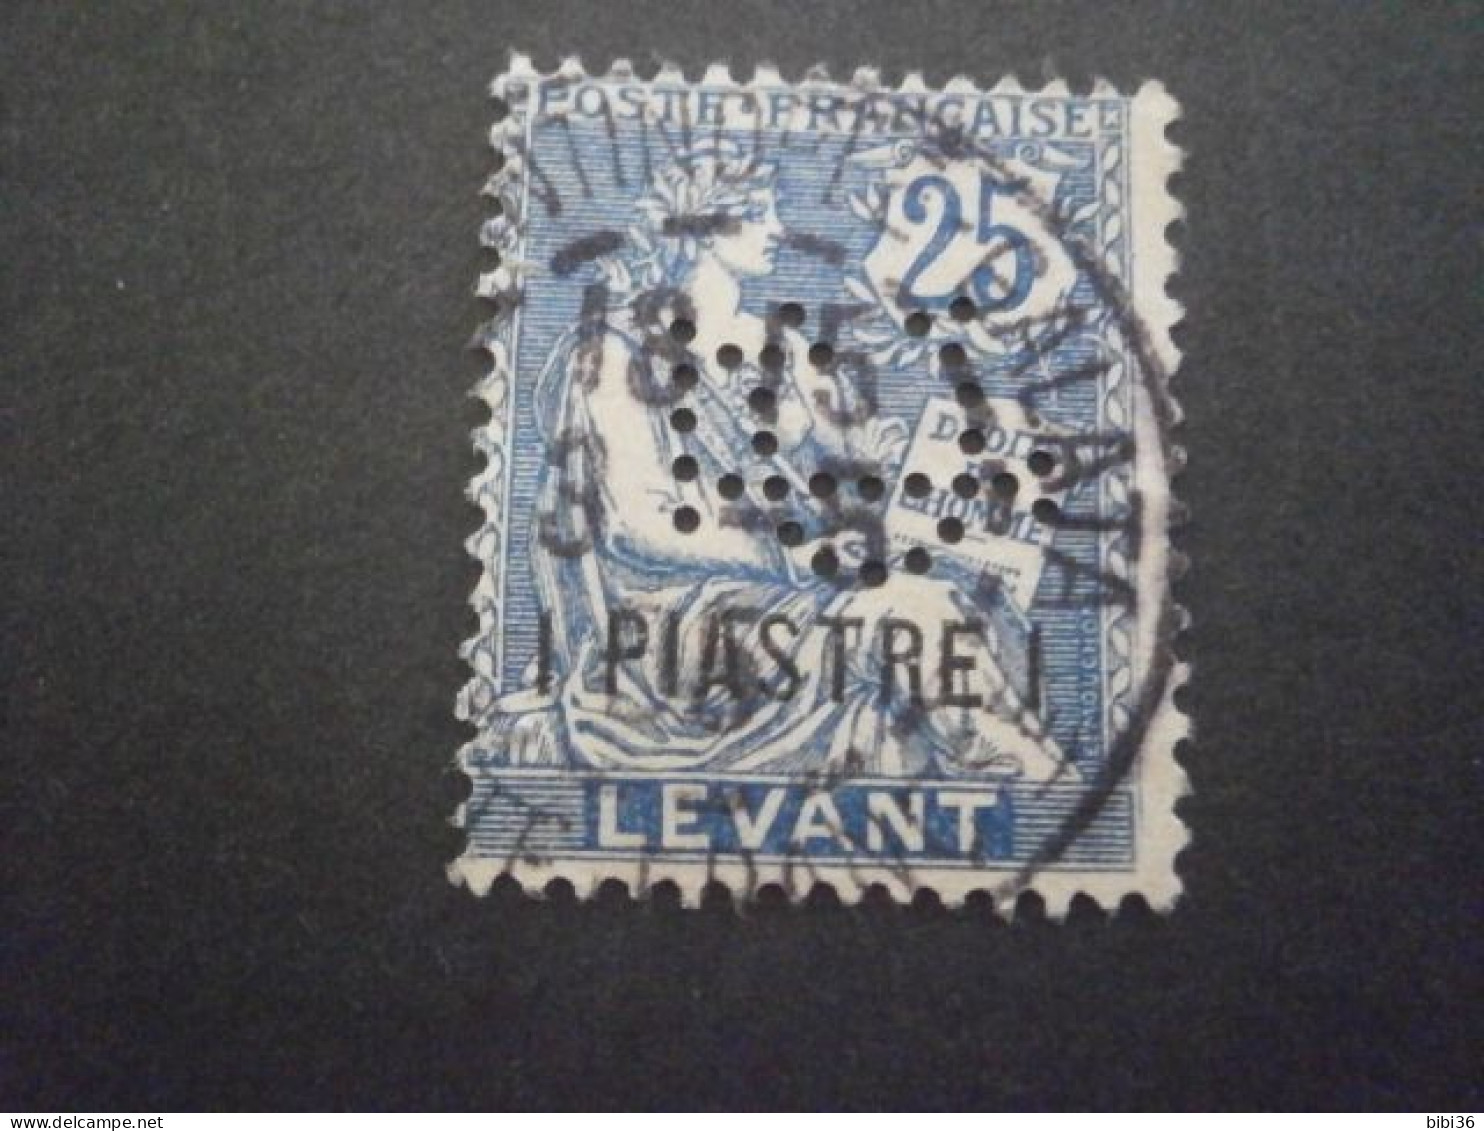 LEVANT MOUCHON 17 CL5 PERFORATION PERFORES PERFORE PERFIN PERFINS PERFORATION PERFORIERT LOCHUNG PERCE PERFORIERT PERFO - Used Stamps